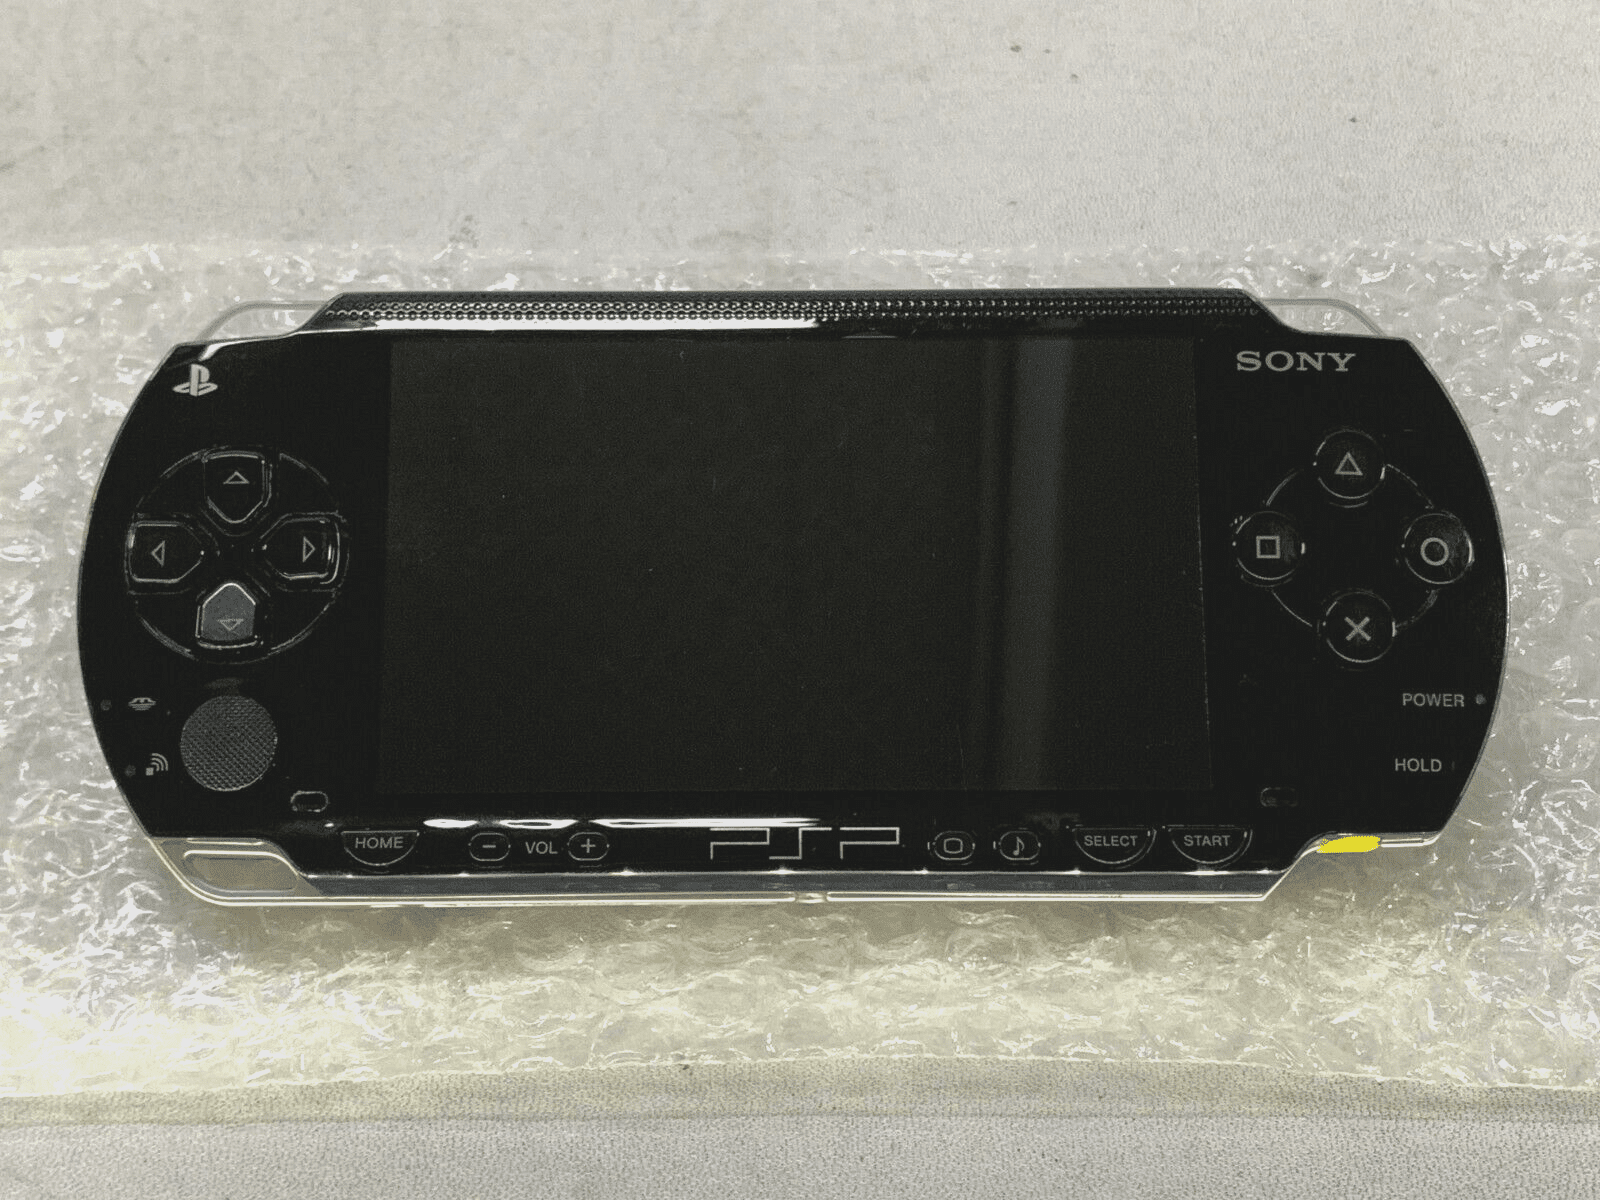 Sony PSP-1001 PlayStation Portable - Black USED - OregonRecycles